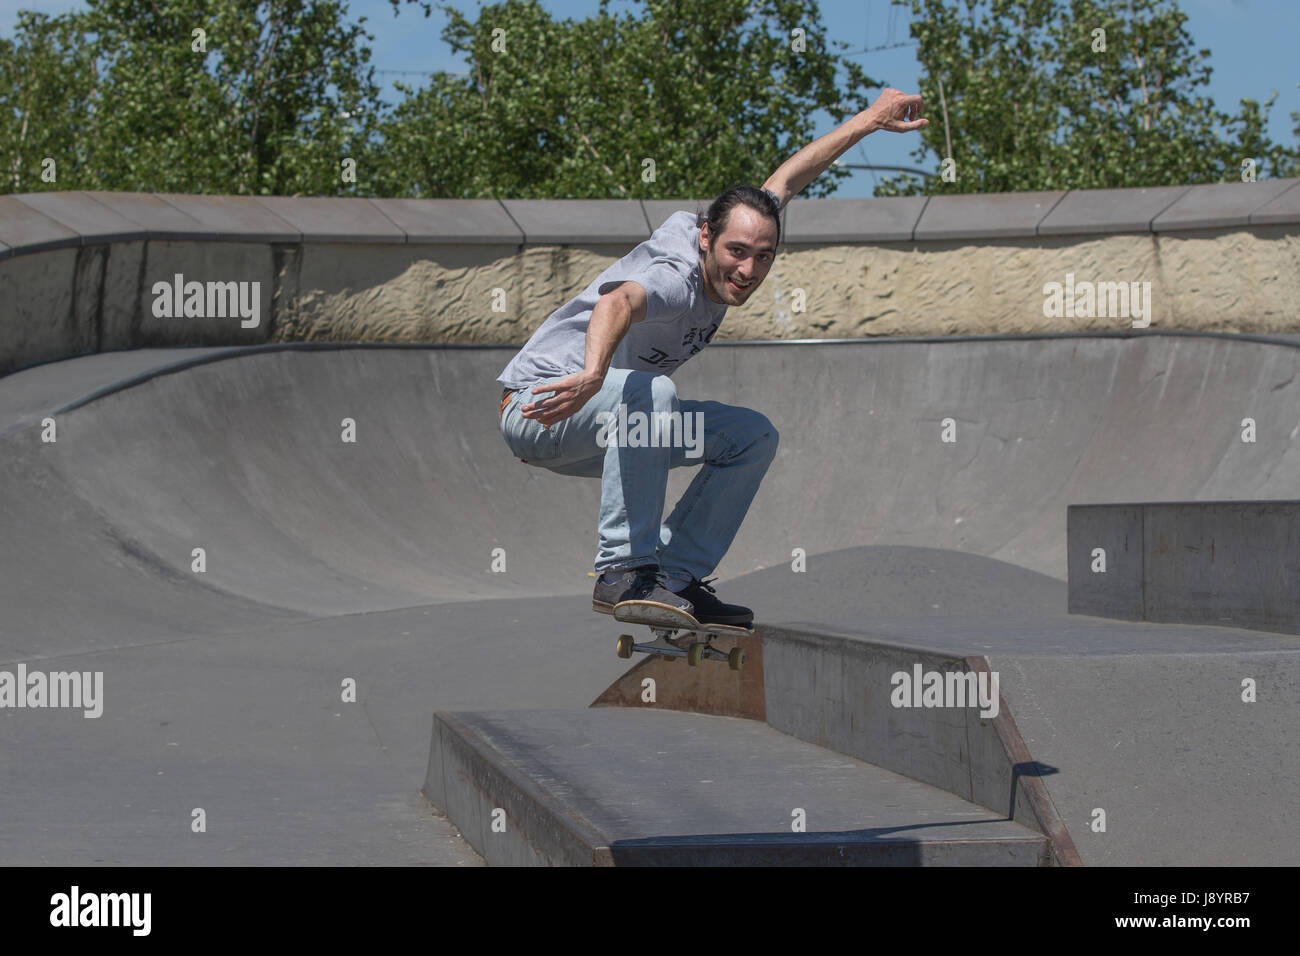 Handsome skateboarder jumping towards the camera in the air Stock Photo